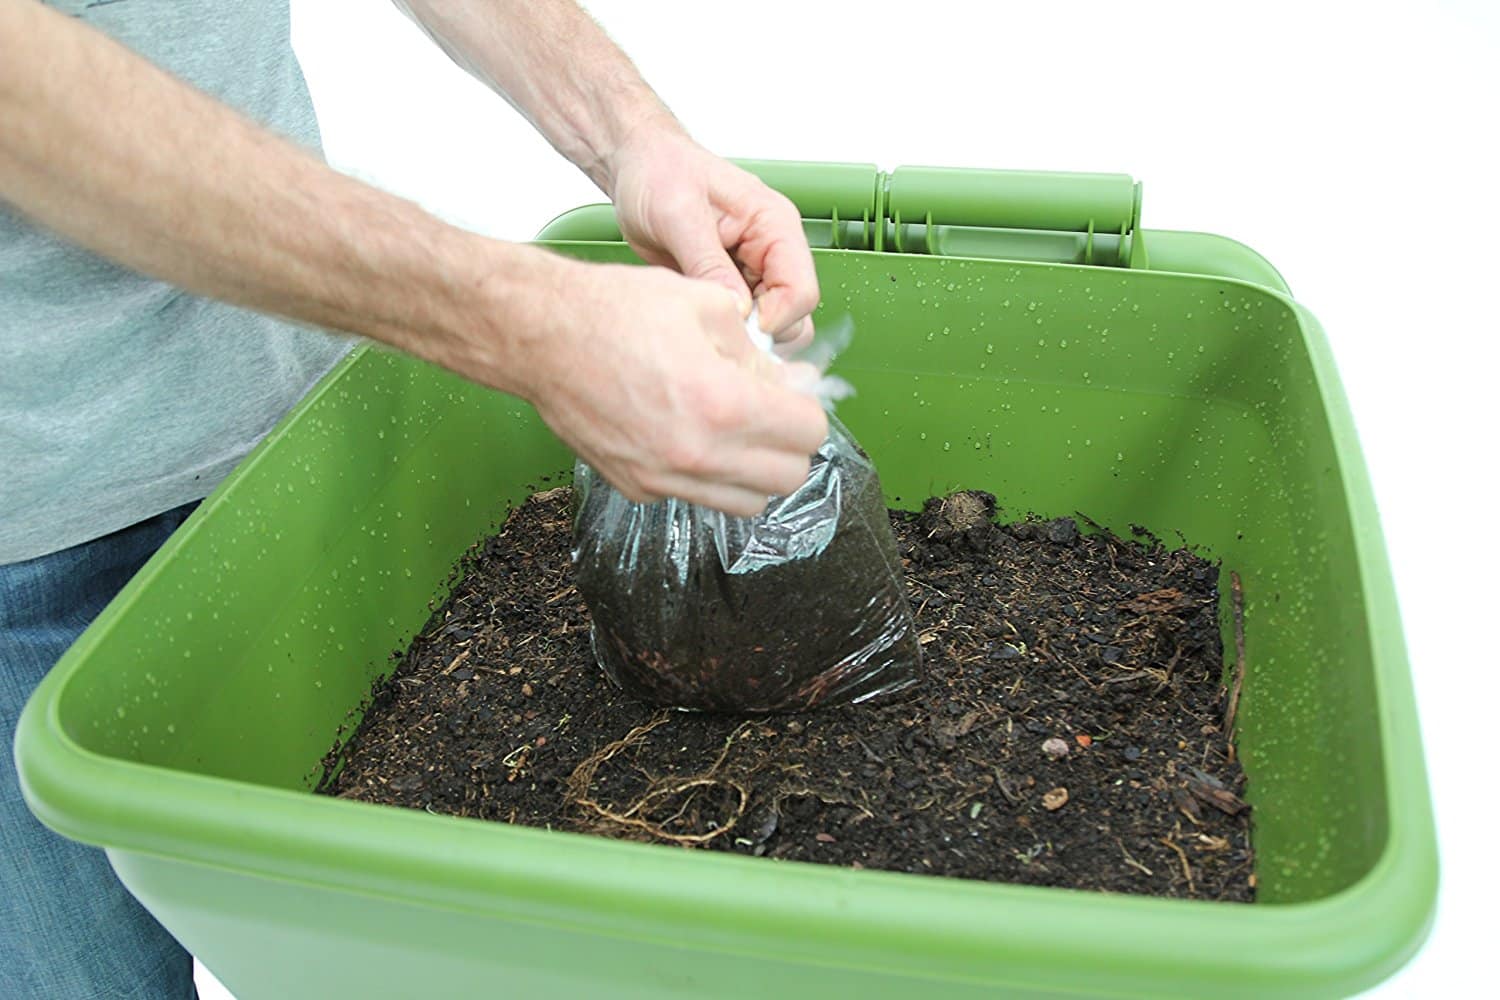 Most Popular Worm Composting Bins For The Garden...